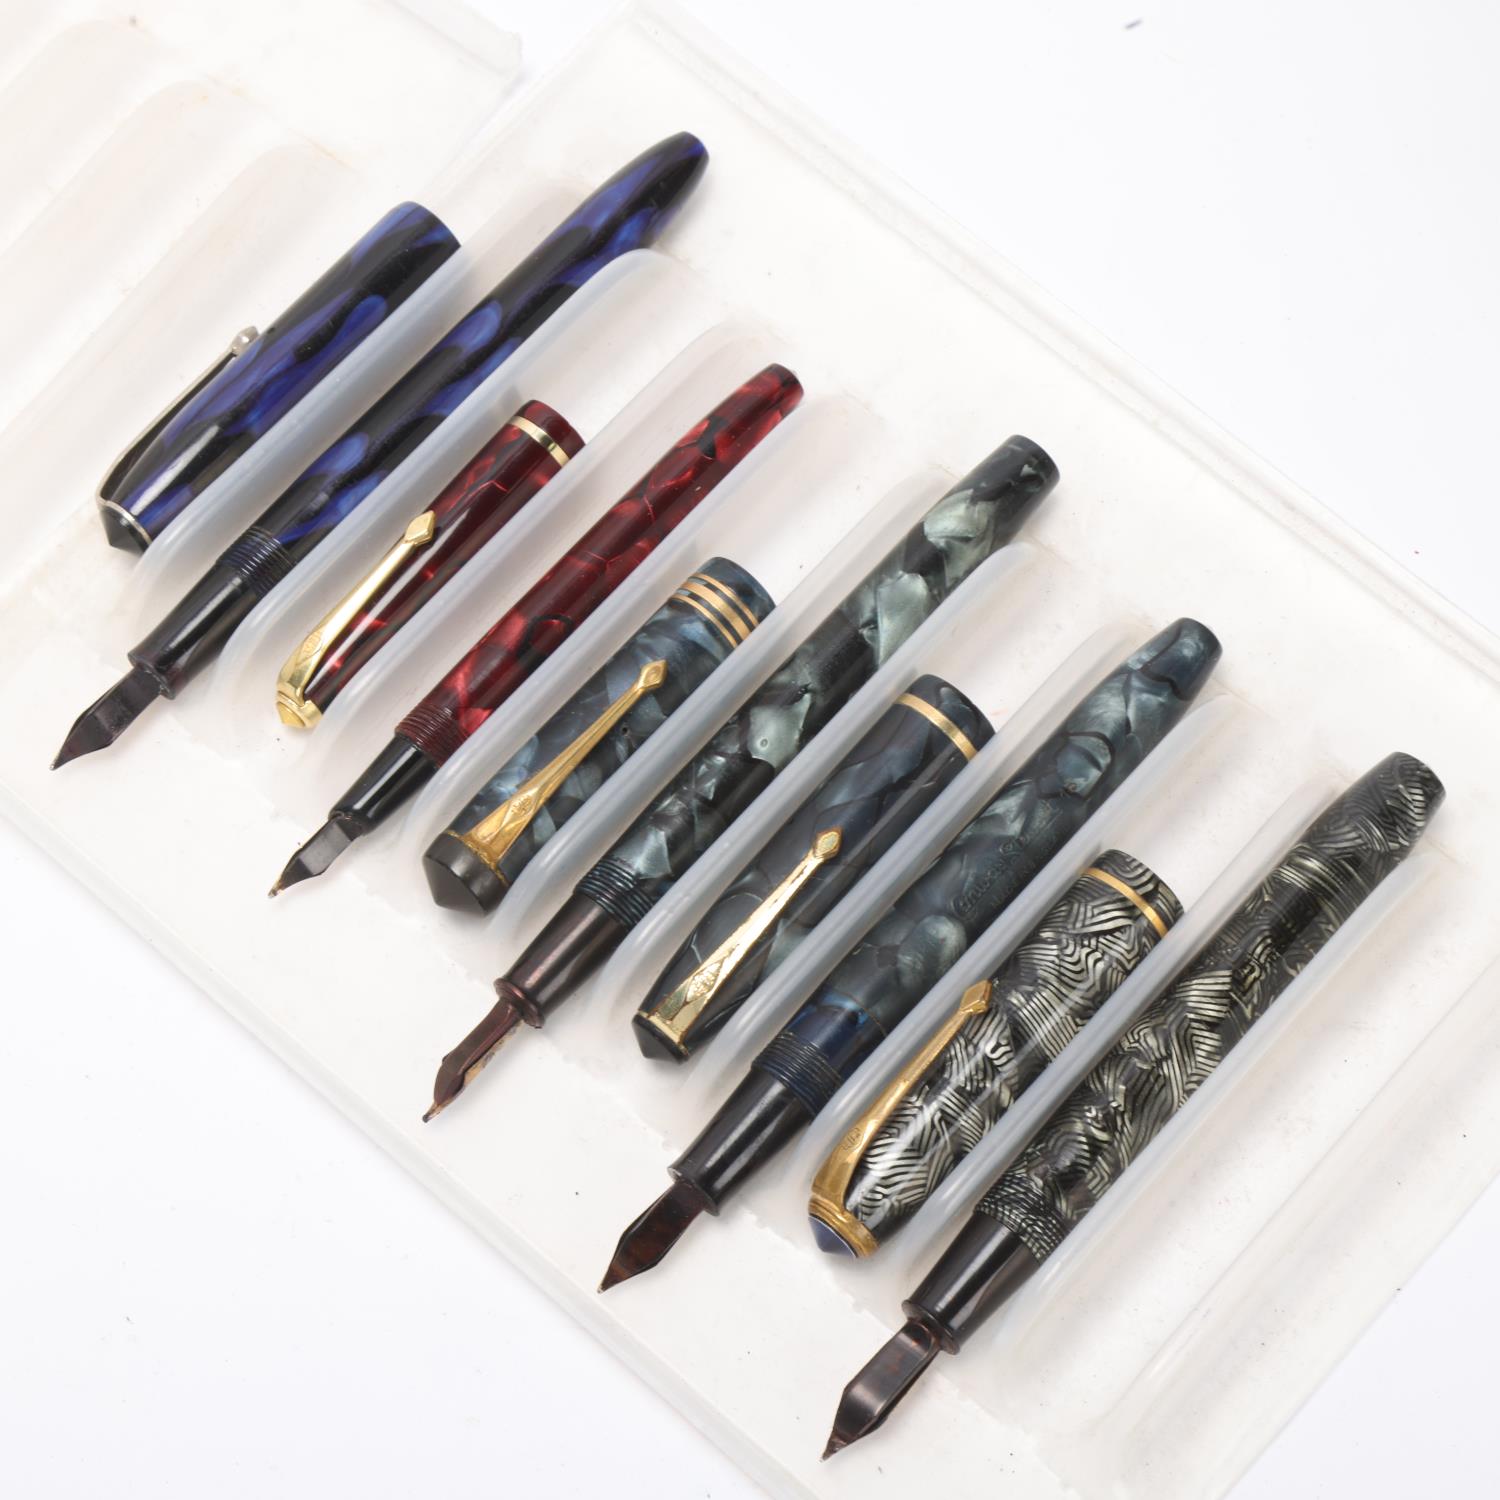 5 Vintage Conway Stewart fountain pens, all lever fill with marble resin bodies and 14ct gold - Image 4 of 4